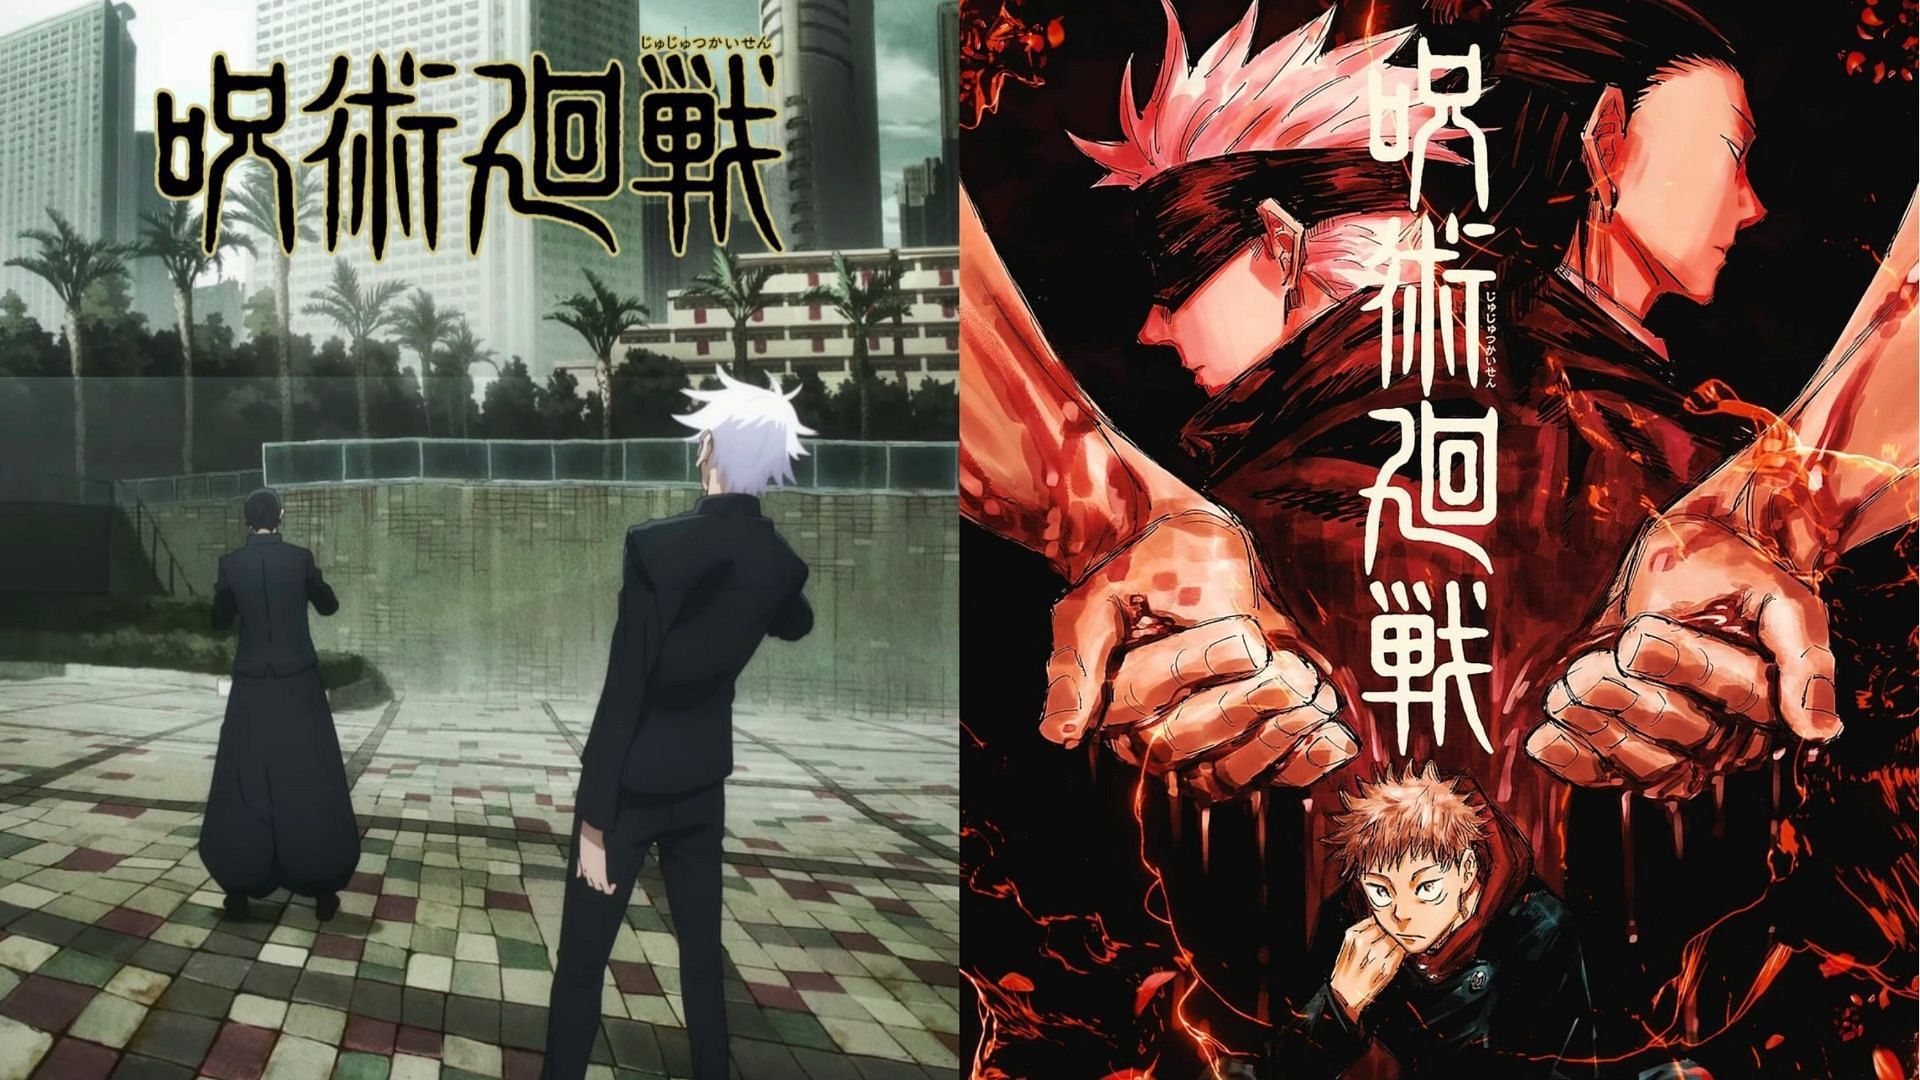 Jujutsu Kaisen season 2 release date, simulcast and what we know so far -  Polygon